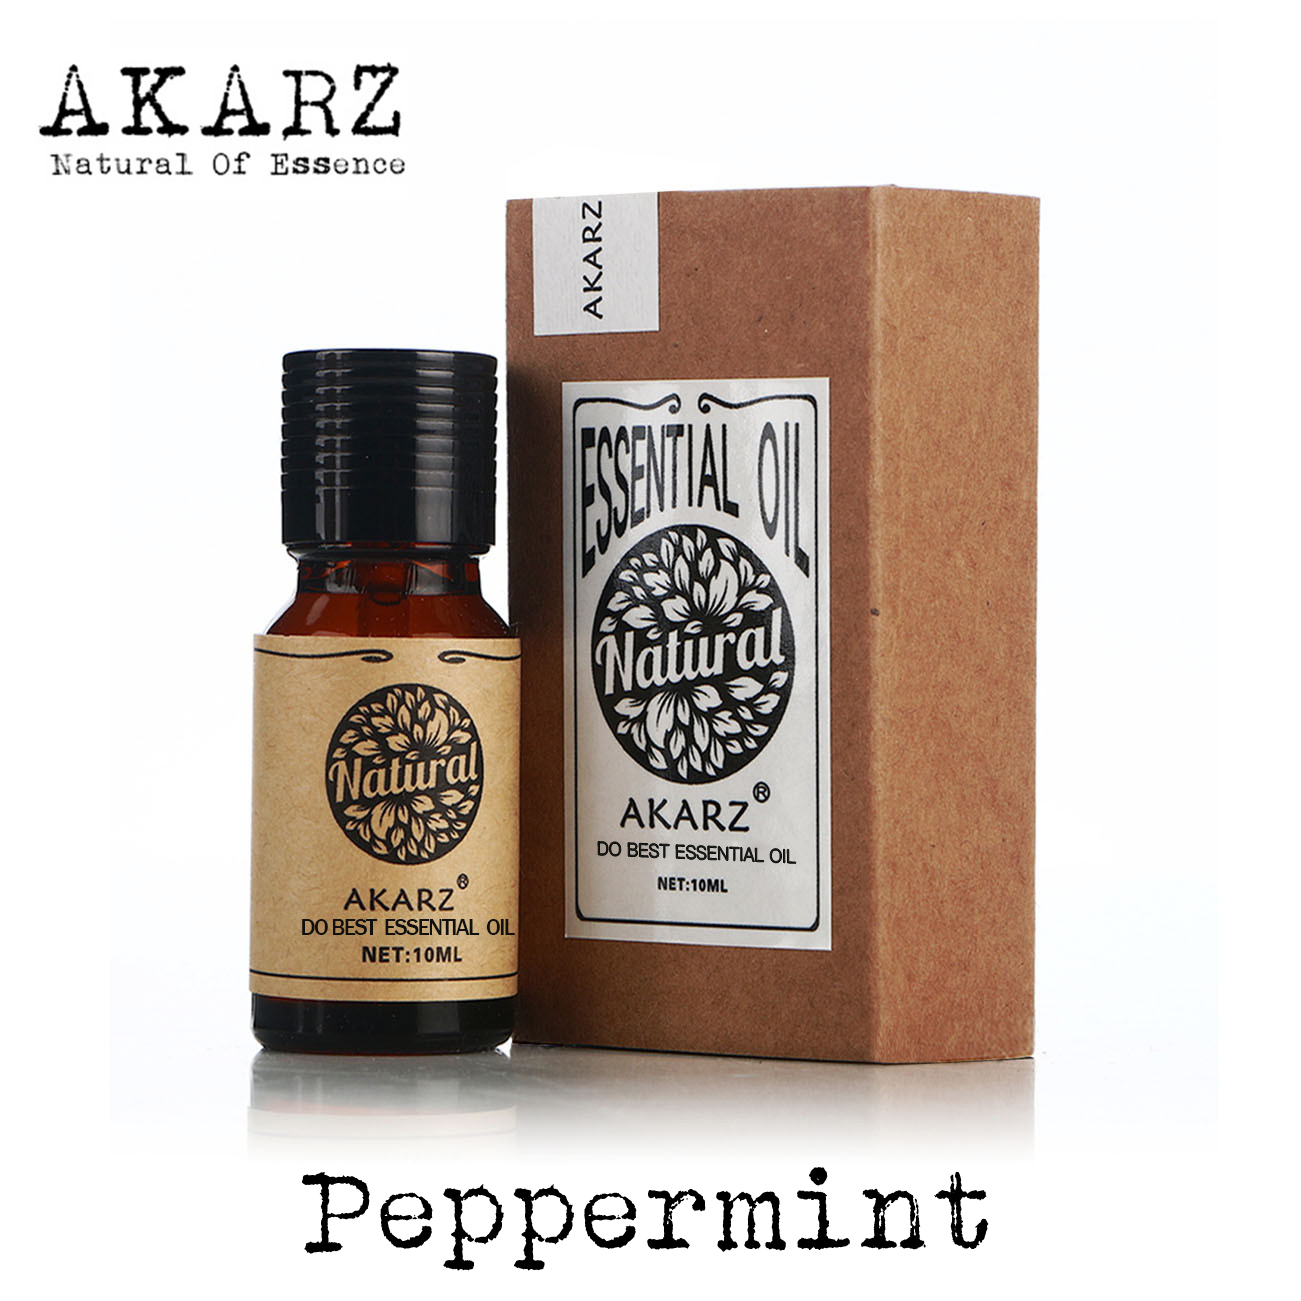 Peppermint essential oil AKARZ natural Oiliness Cosmetics Candle Soap Scents Making DIY odorant raw material peppermint oil